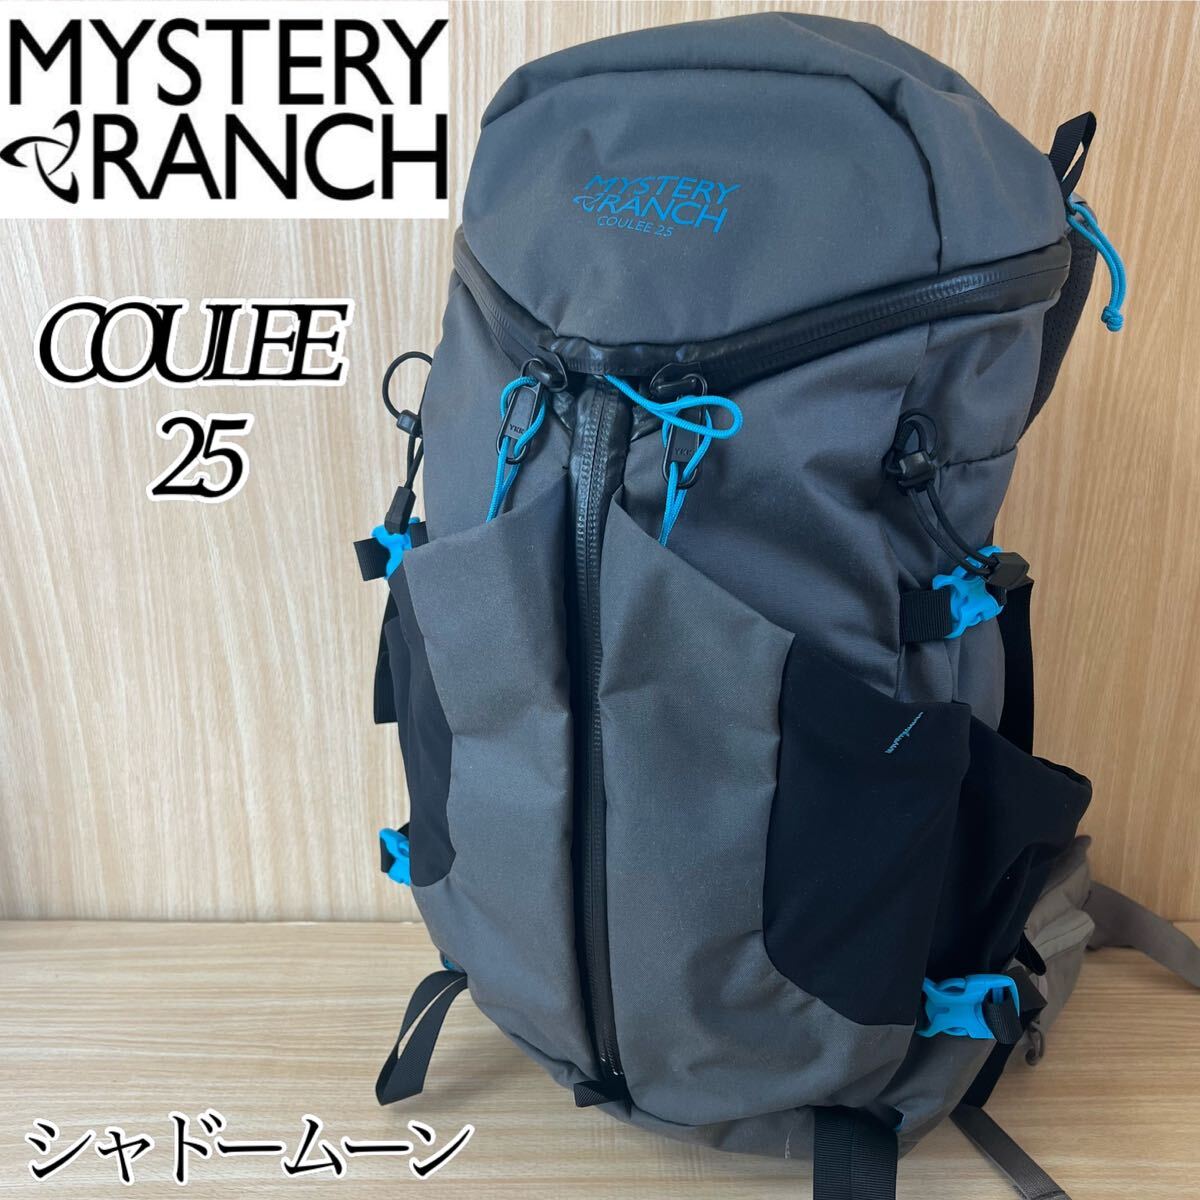 [ great popularity ]MYSTERY RANCH COULEE25 GRAY Mystery Ranch Koo Lee 25 rucksack shadow moon lady's men's combined use bag pack 